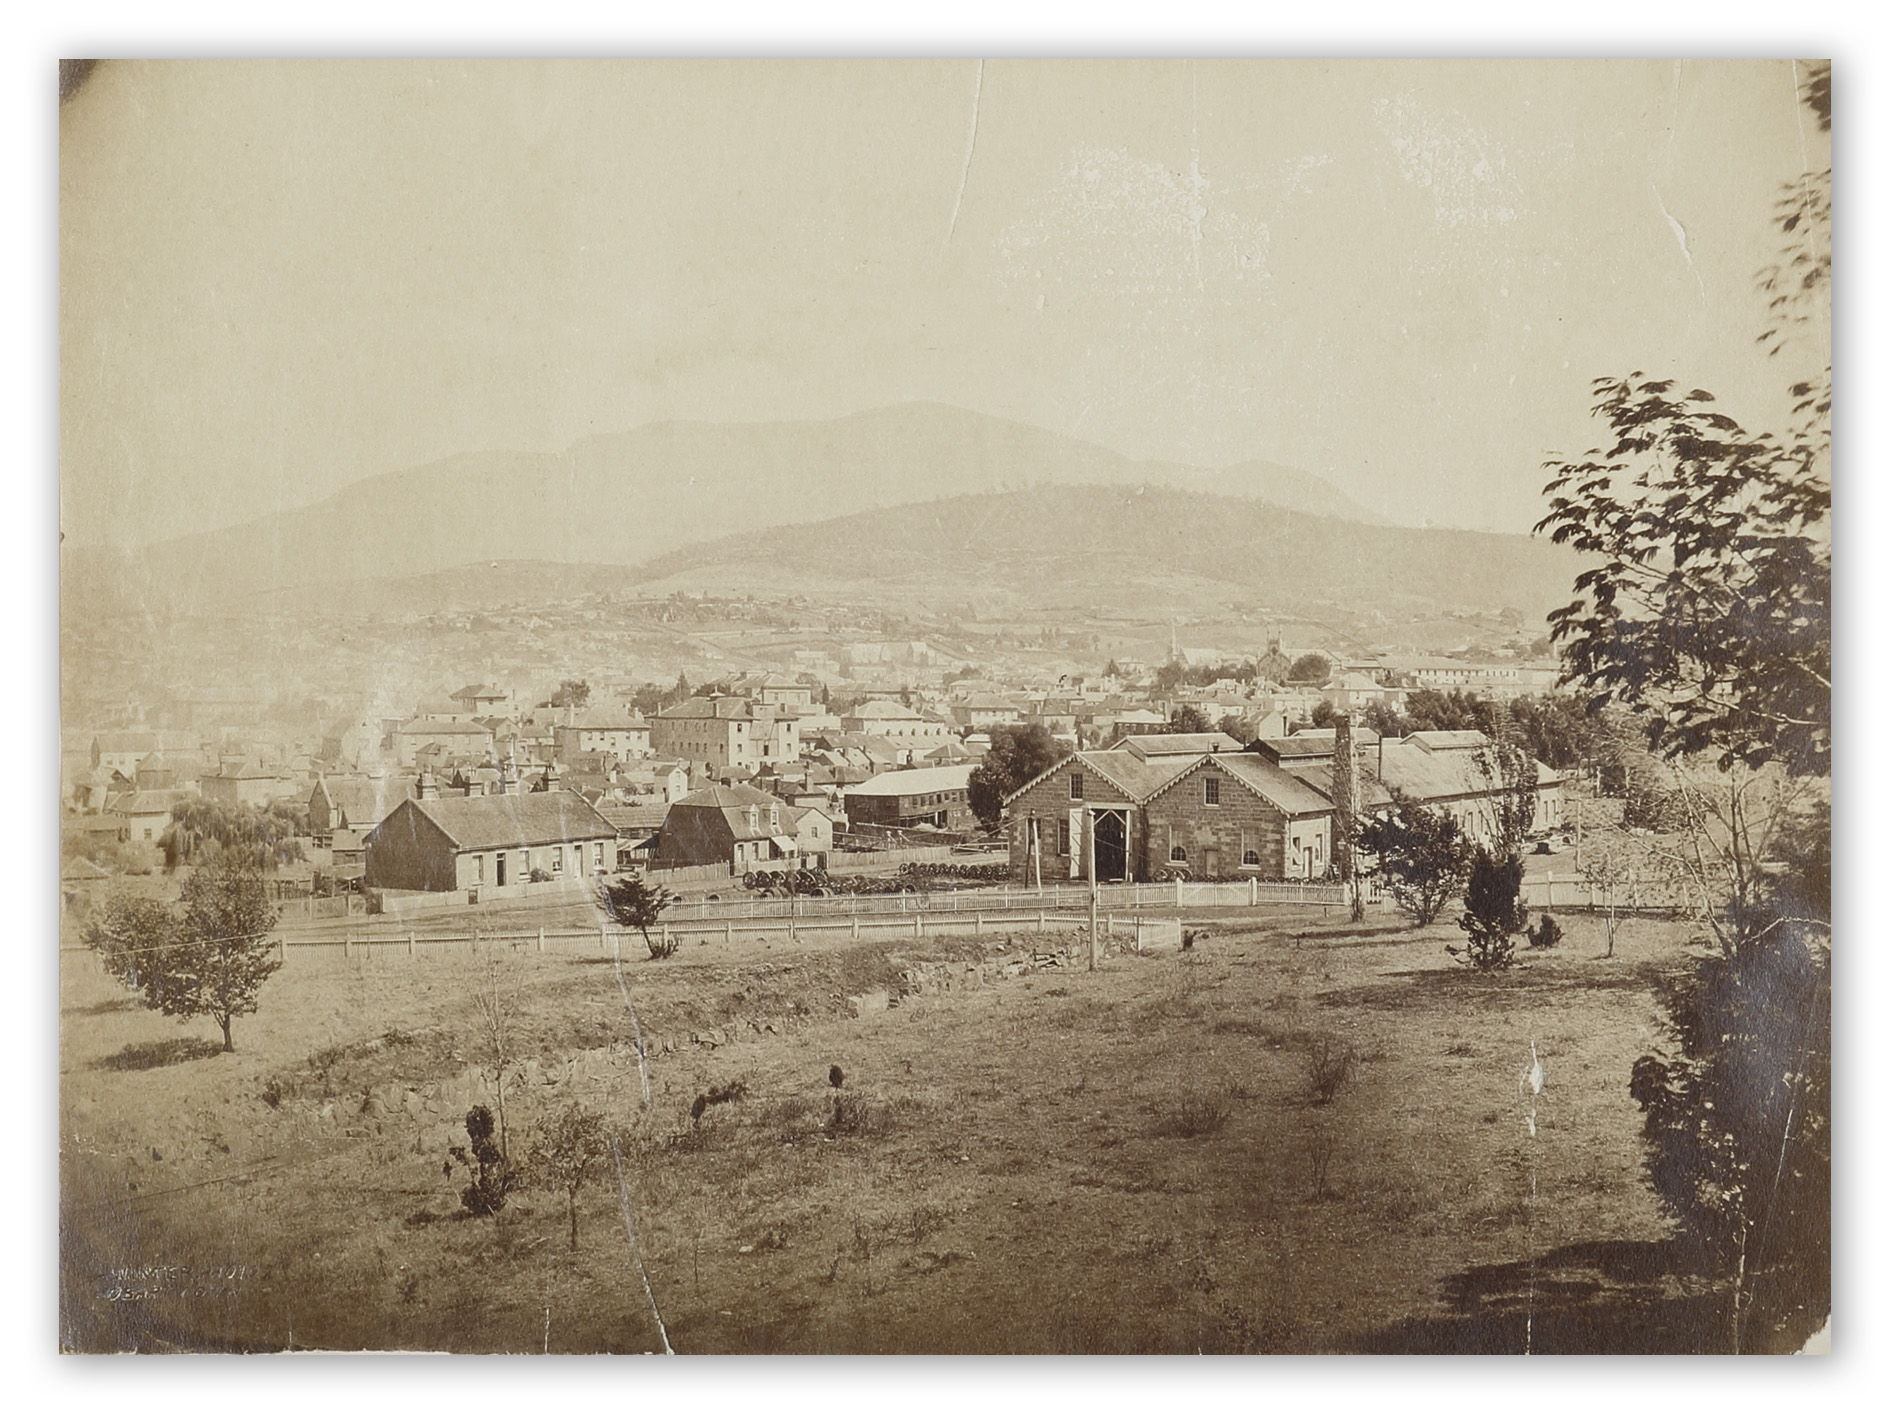 [Hobart] - Antique Photograph from 1875